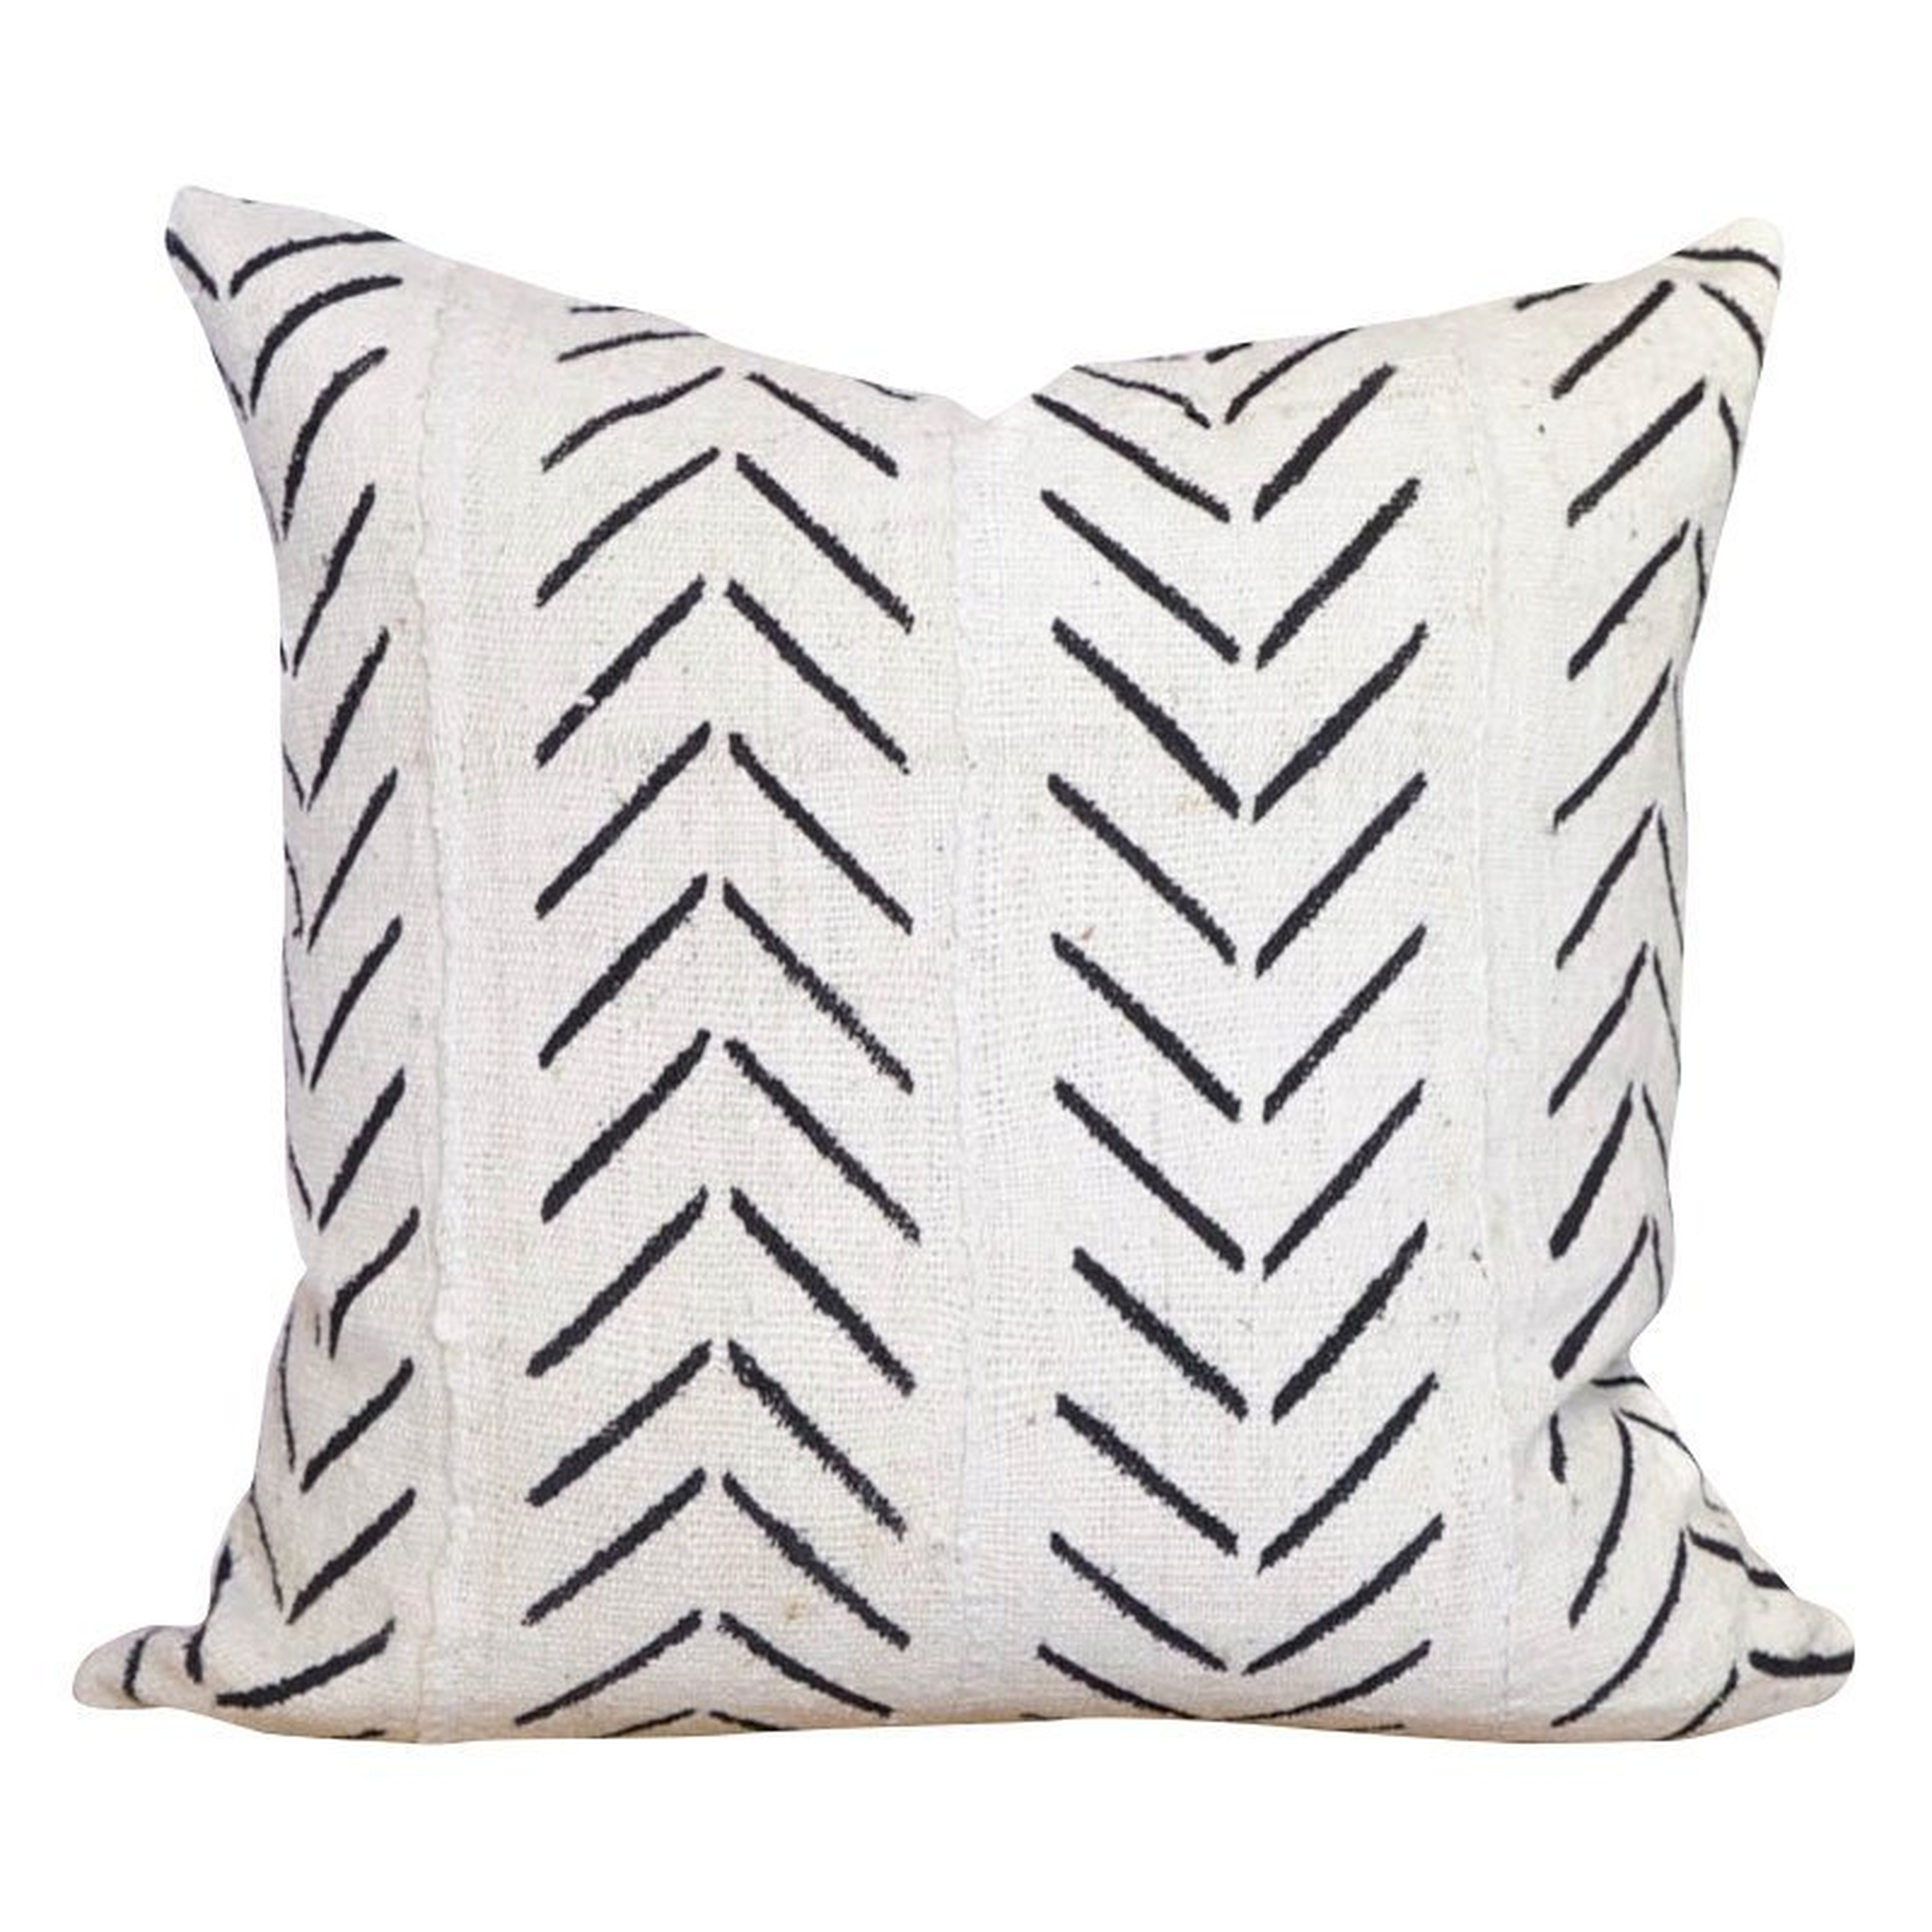 Chevron Arrow Print African Mud Cloth Pillow Cover - insert not included - Wayfair